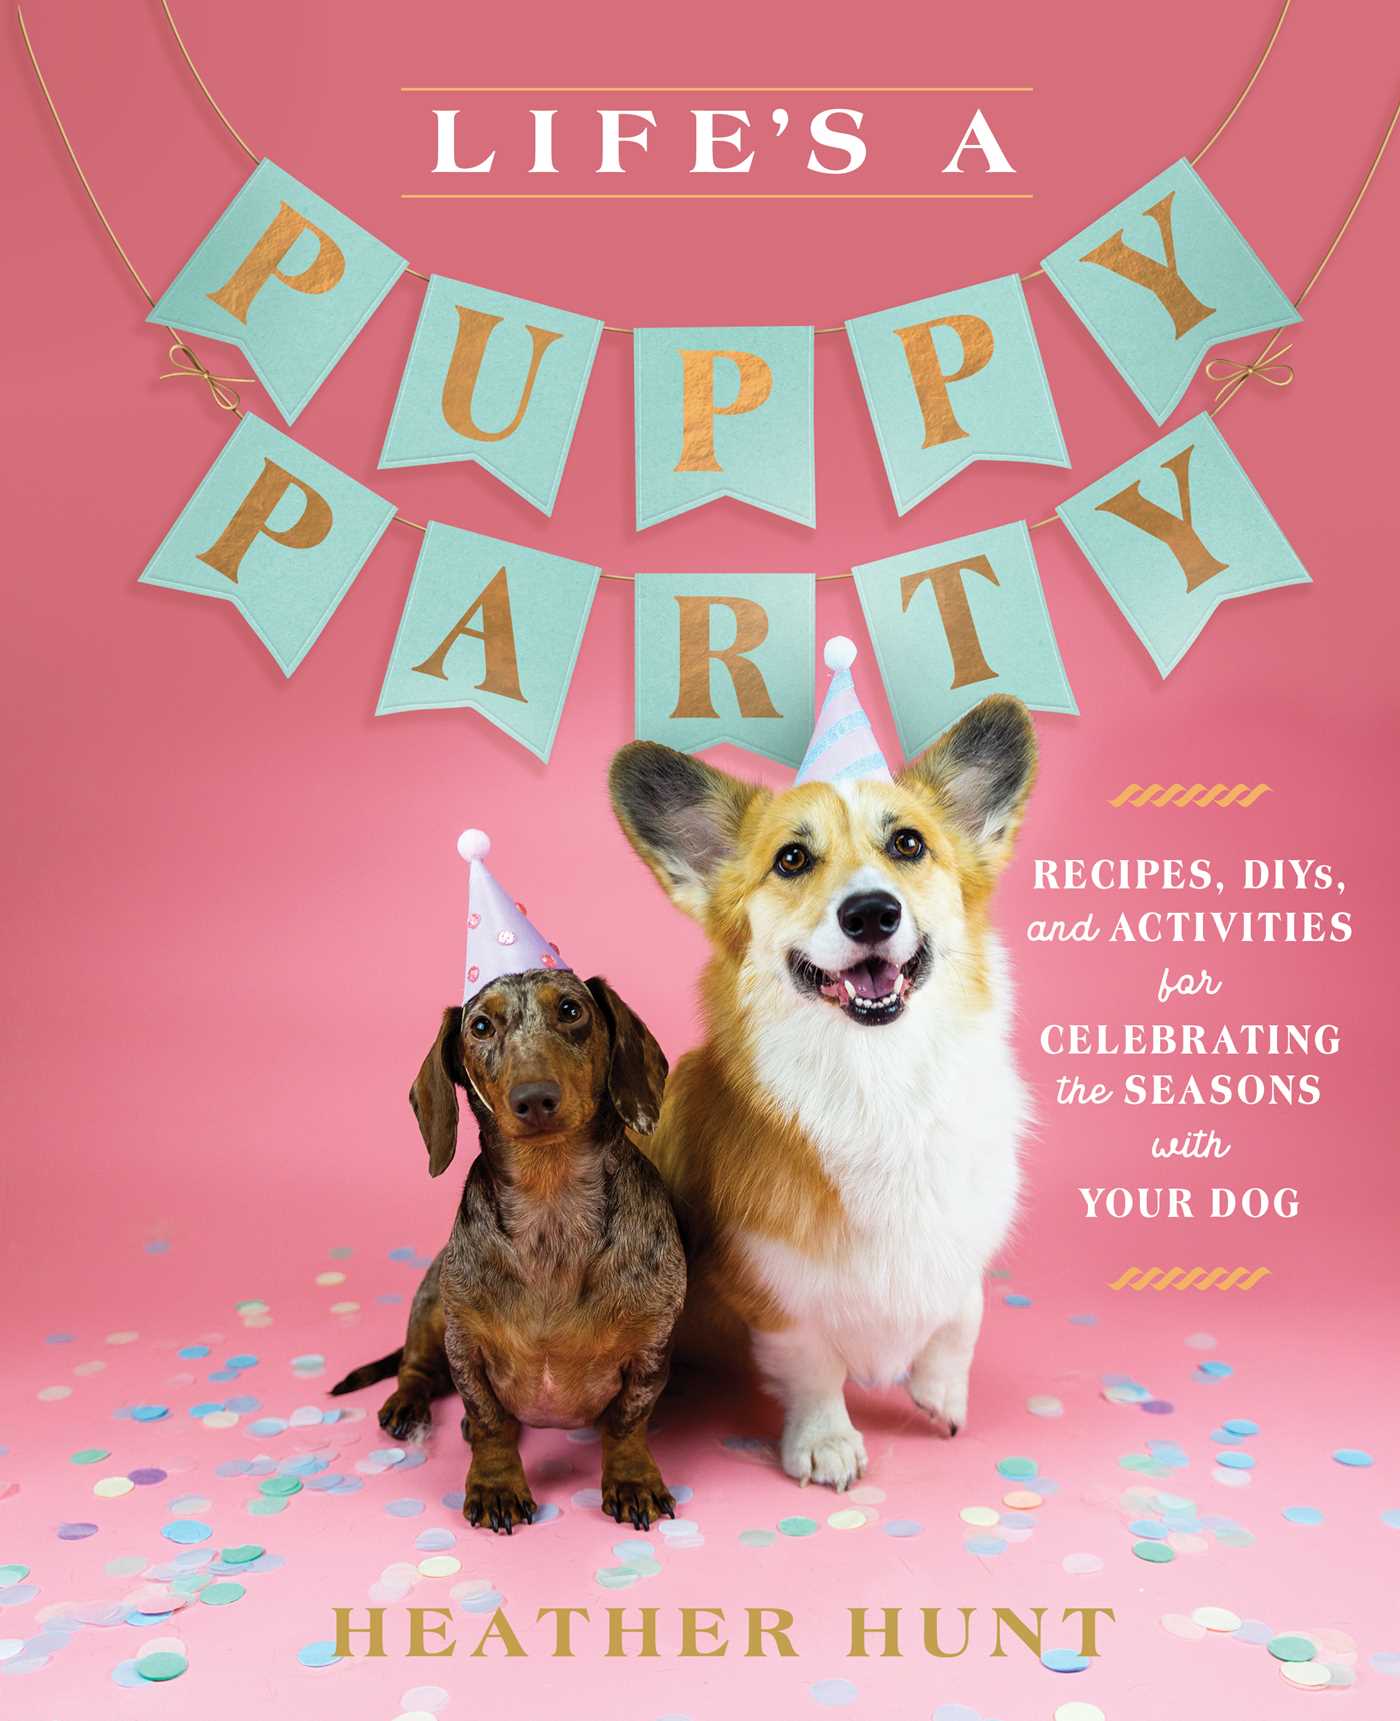 Image for "Life's a Puppy Party"